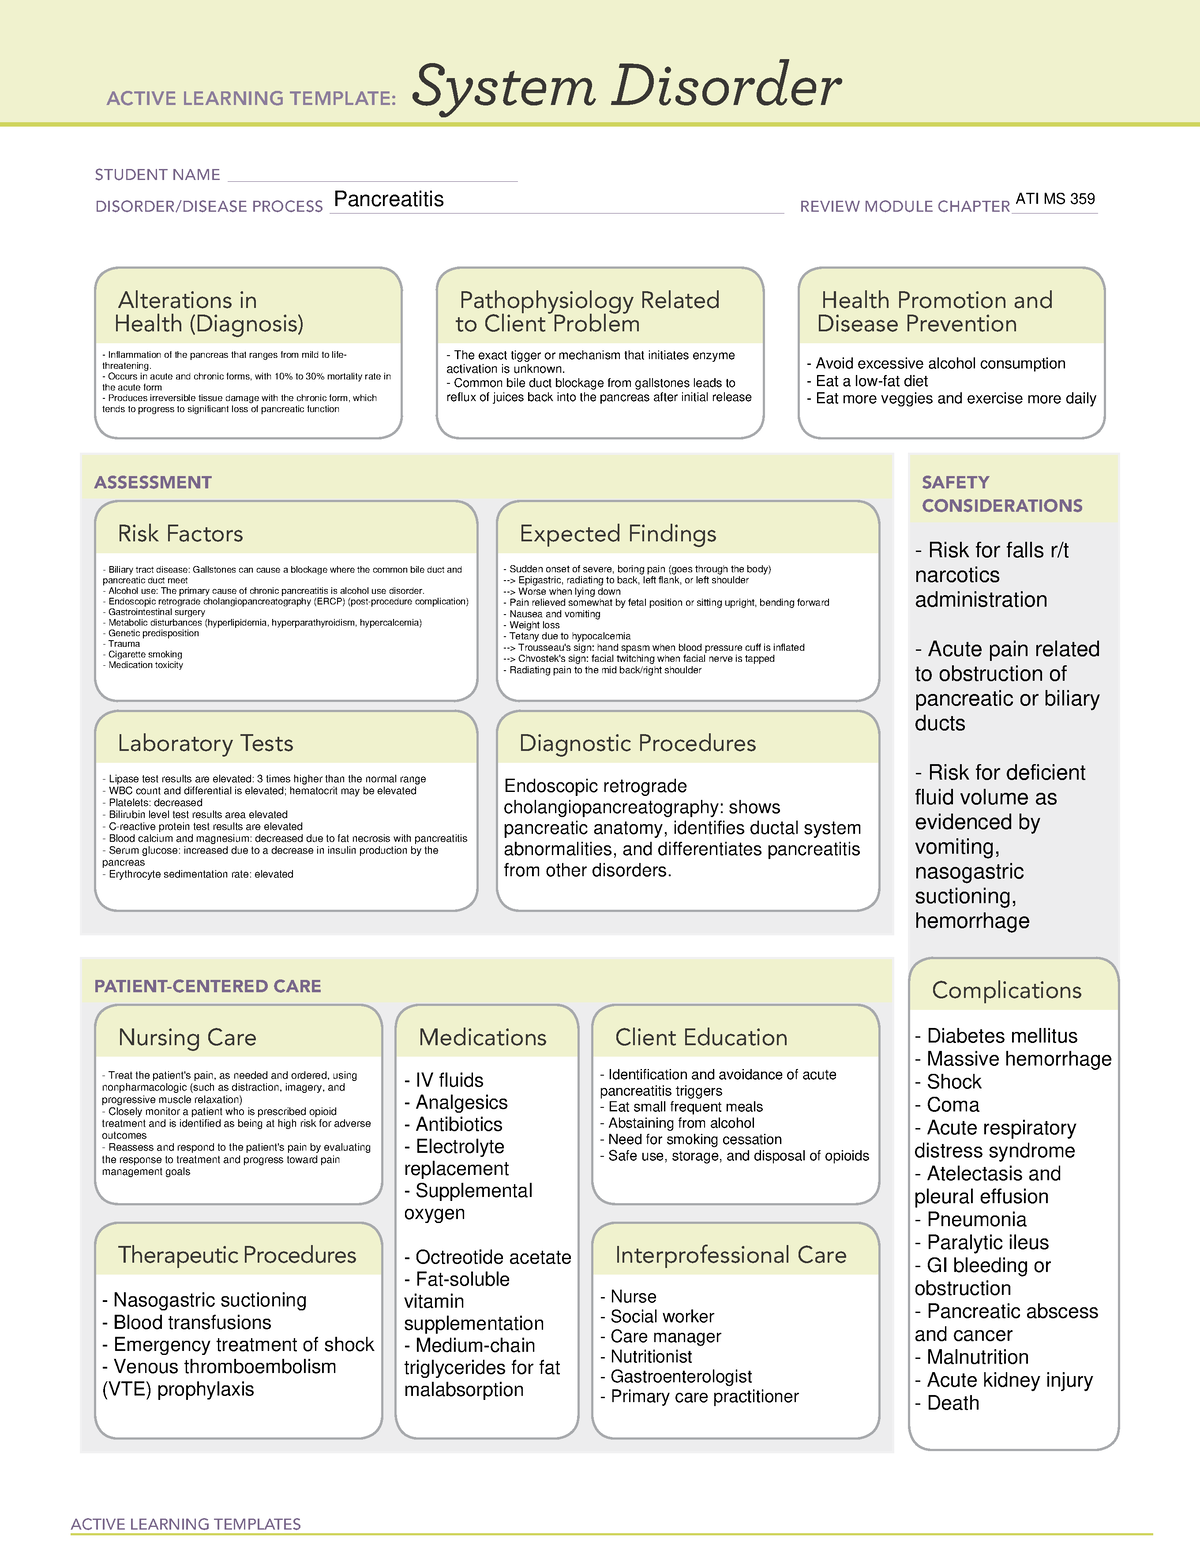 ATI System Disorder Pancreatitis - ACTIVE LEARNING TEMPLATES System ...